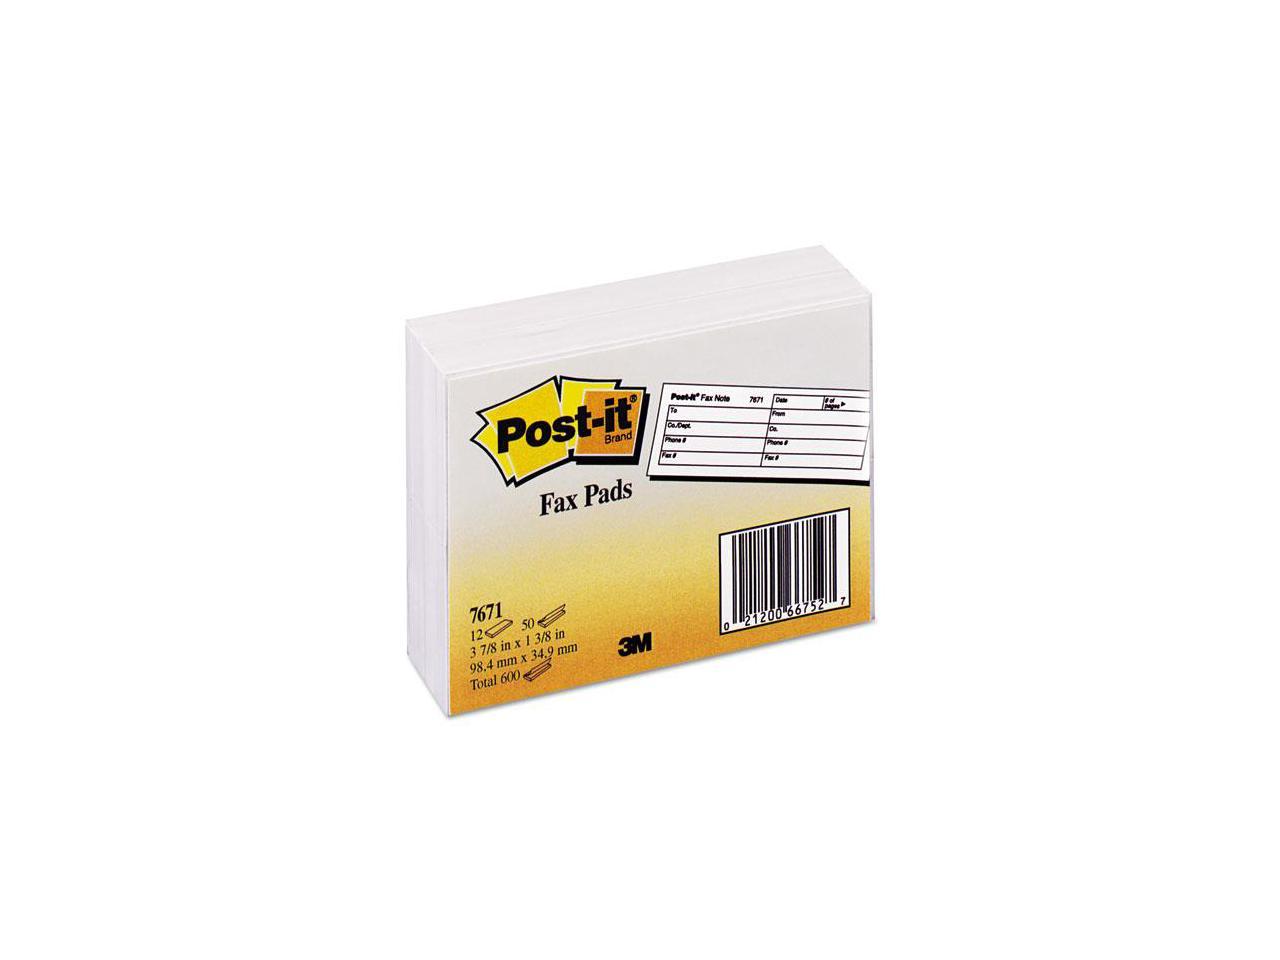 12 Pad X 50 Sheets 4X1.5” 3 M Post-It Fax Notes Pads 7671 